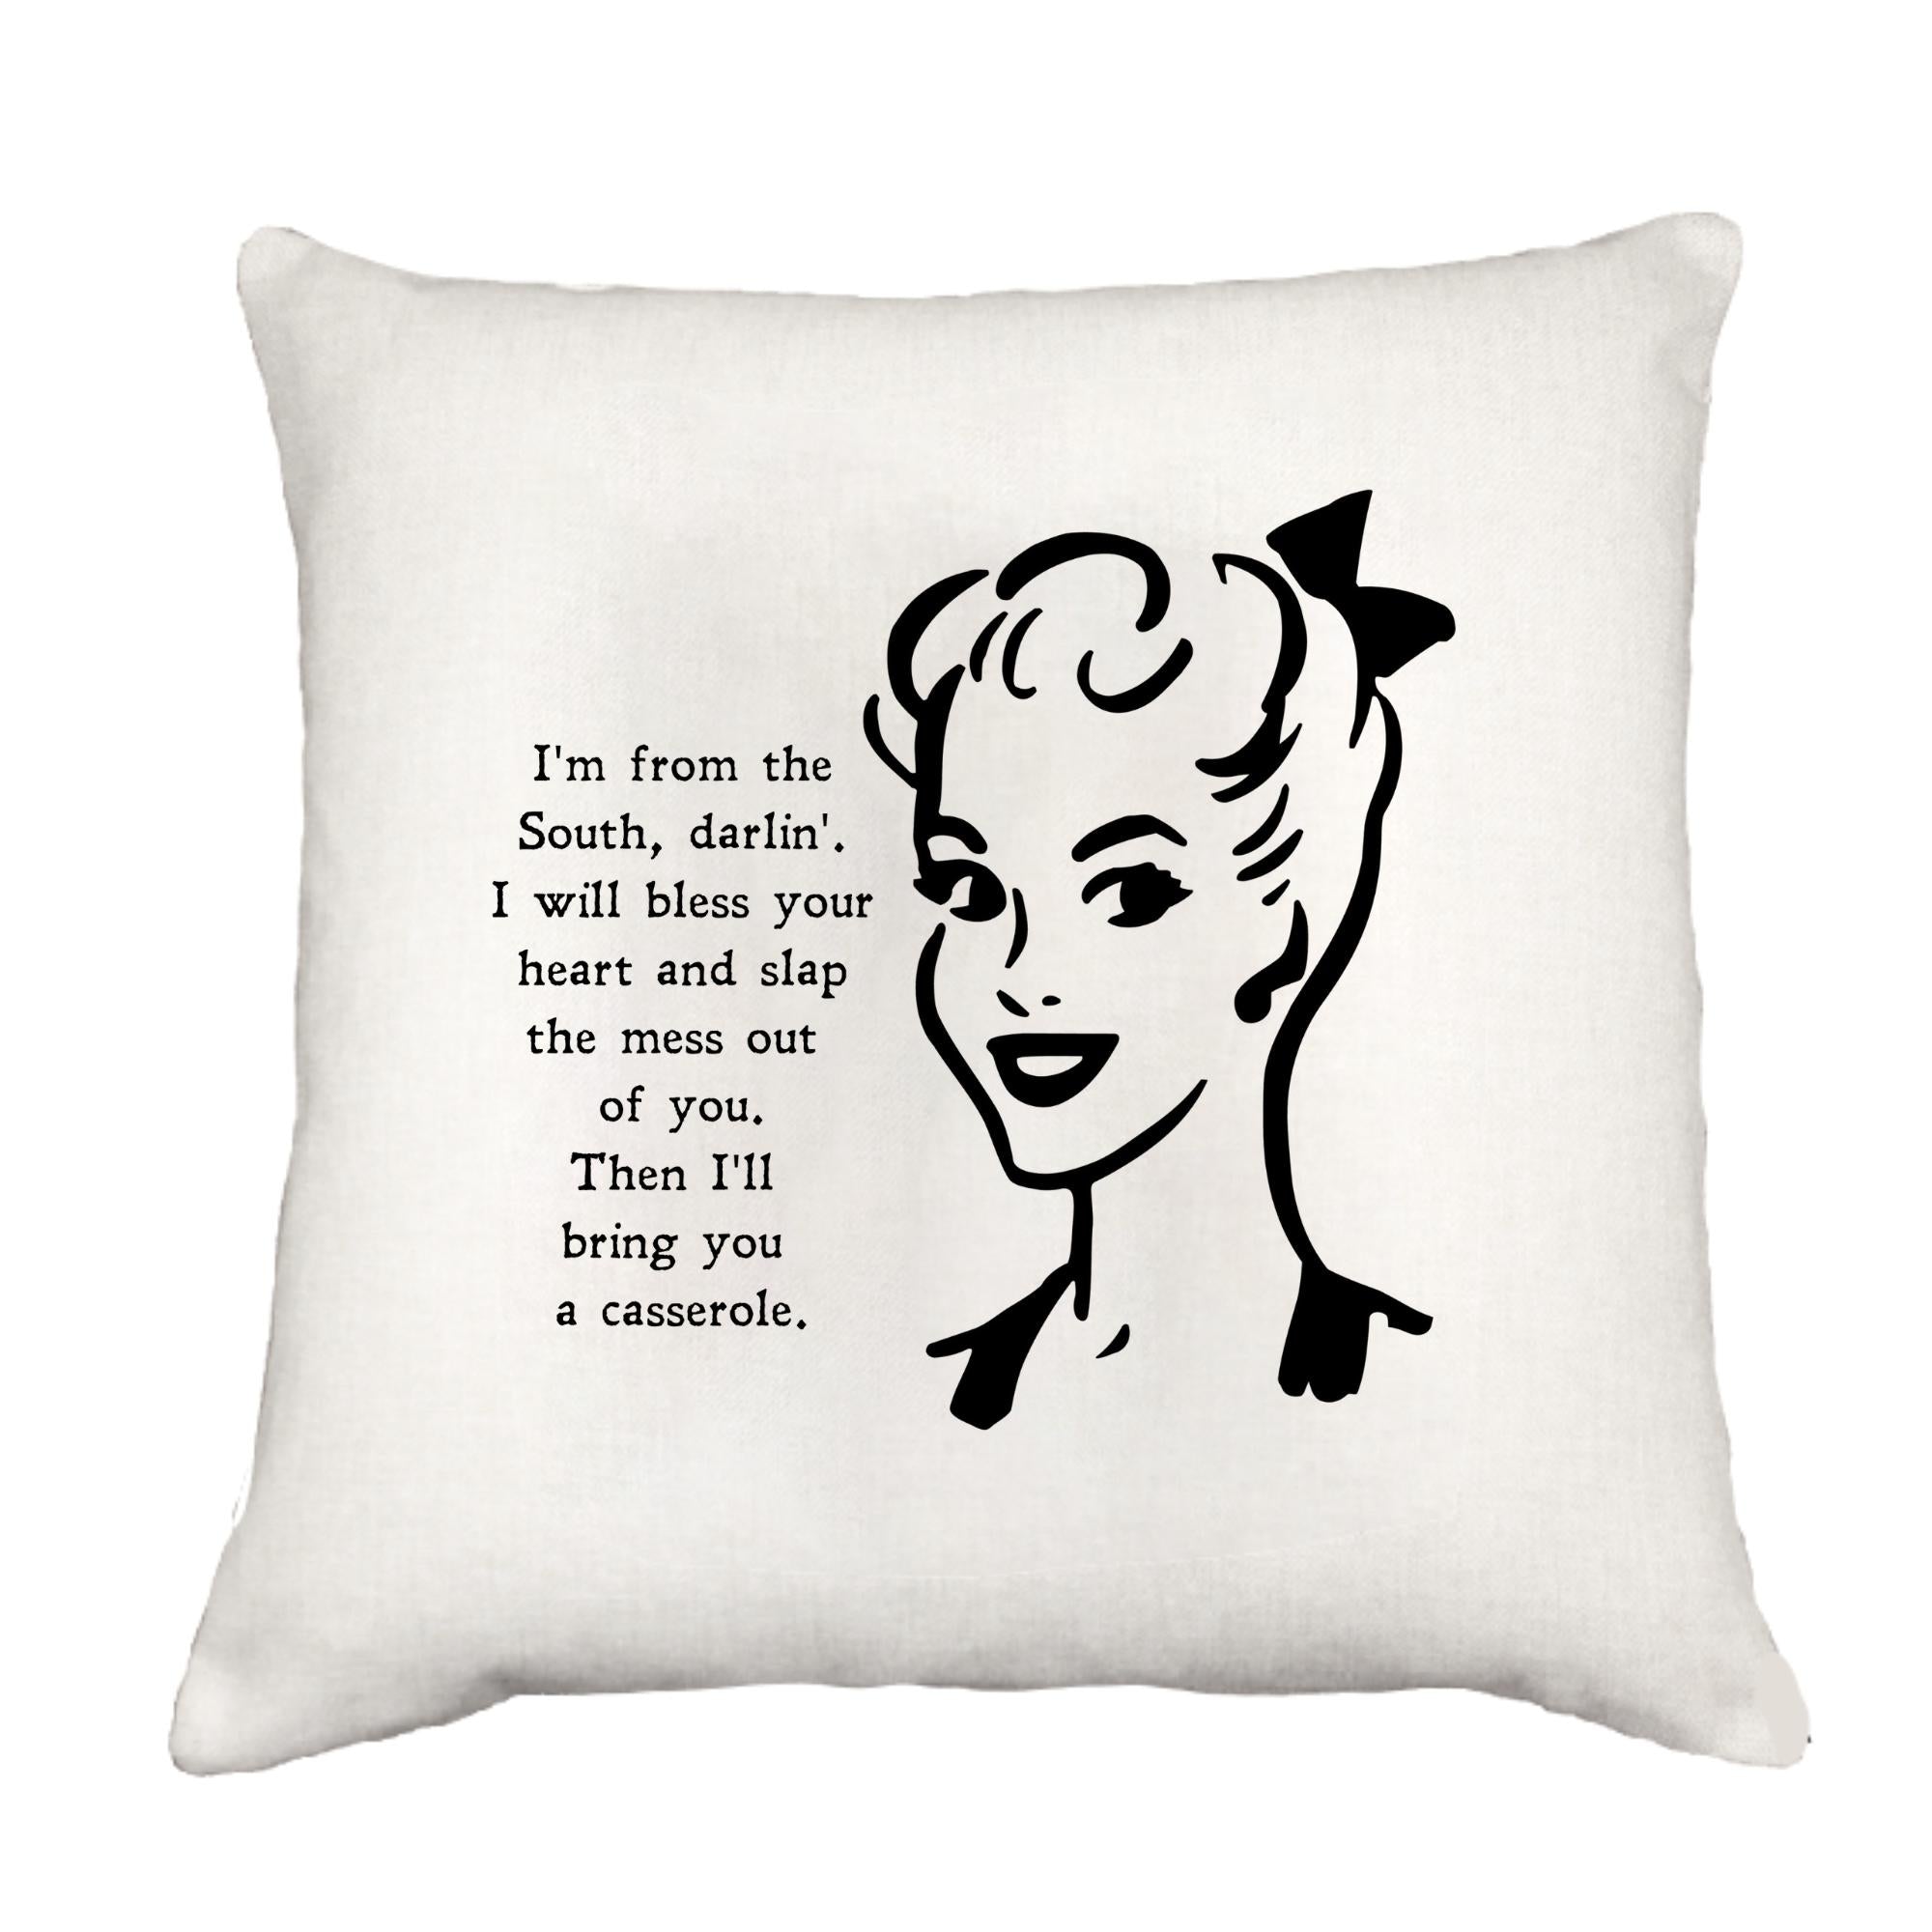 I'm From the South Down Pillow Throw/Decorative Pillow - Southern Sisters